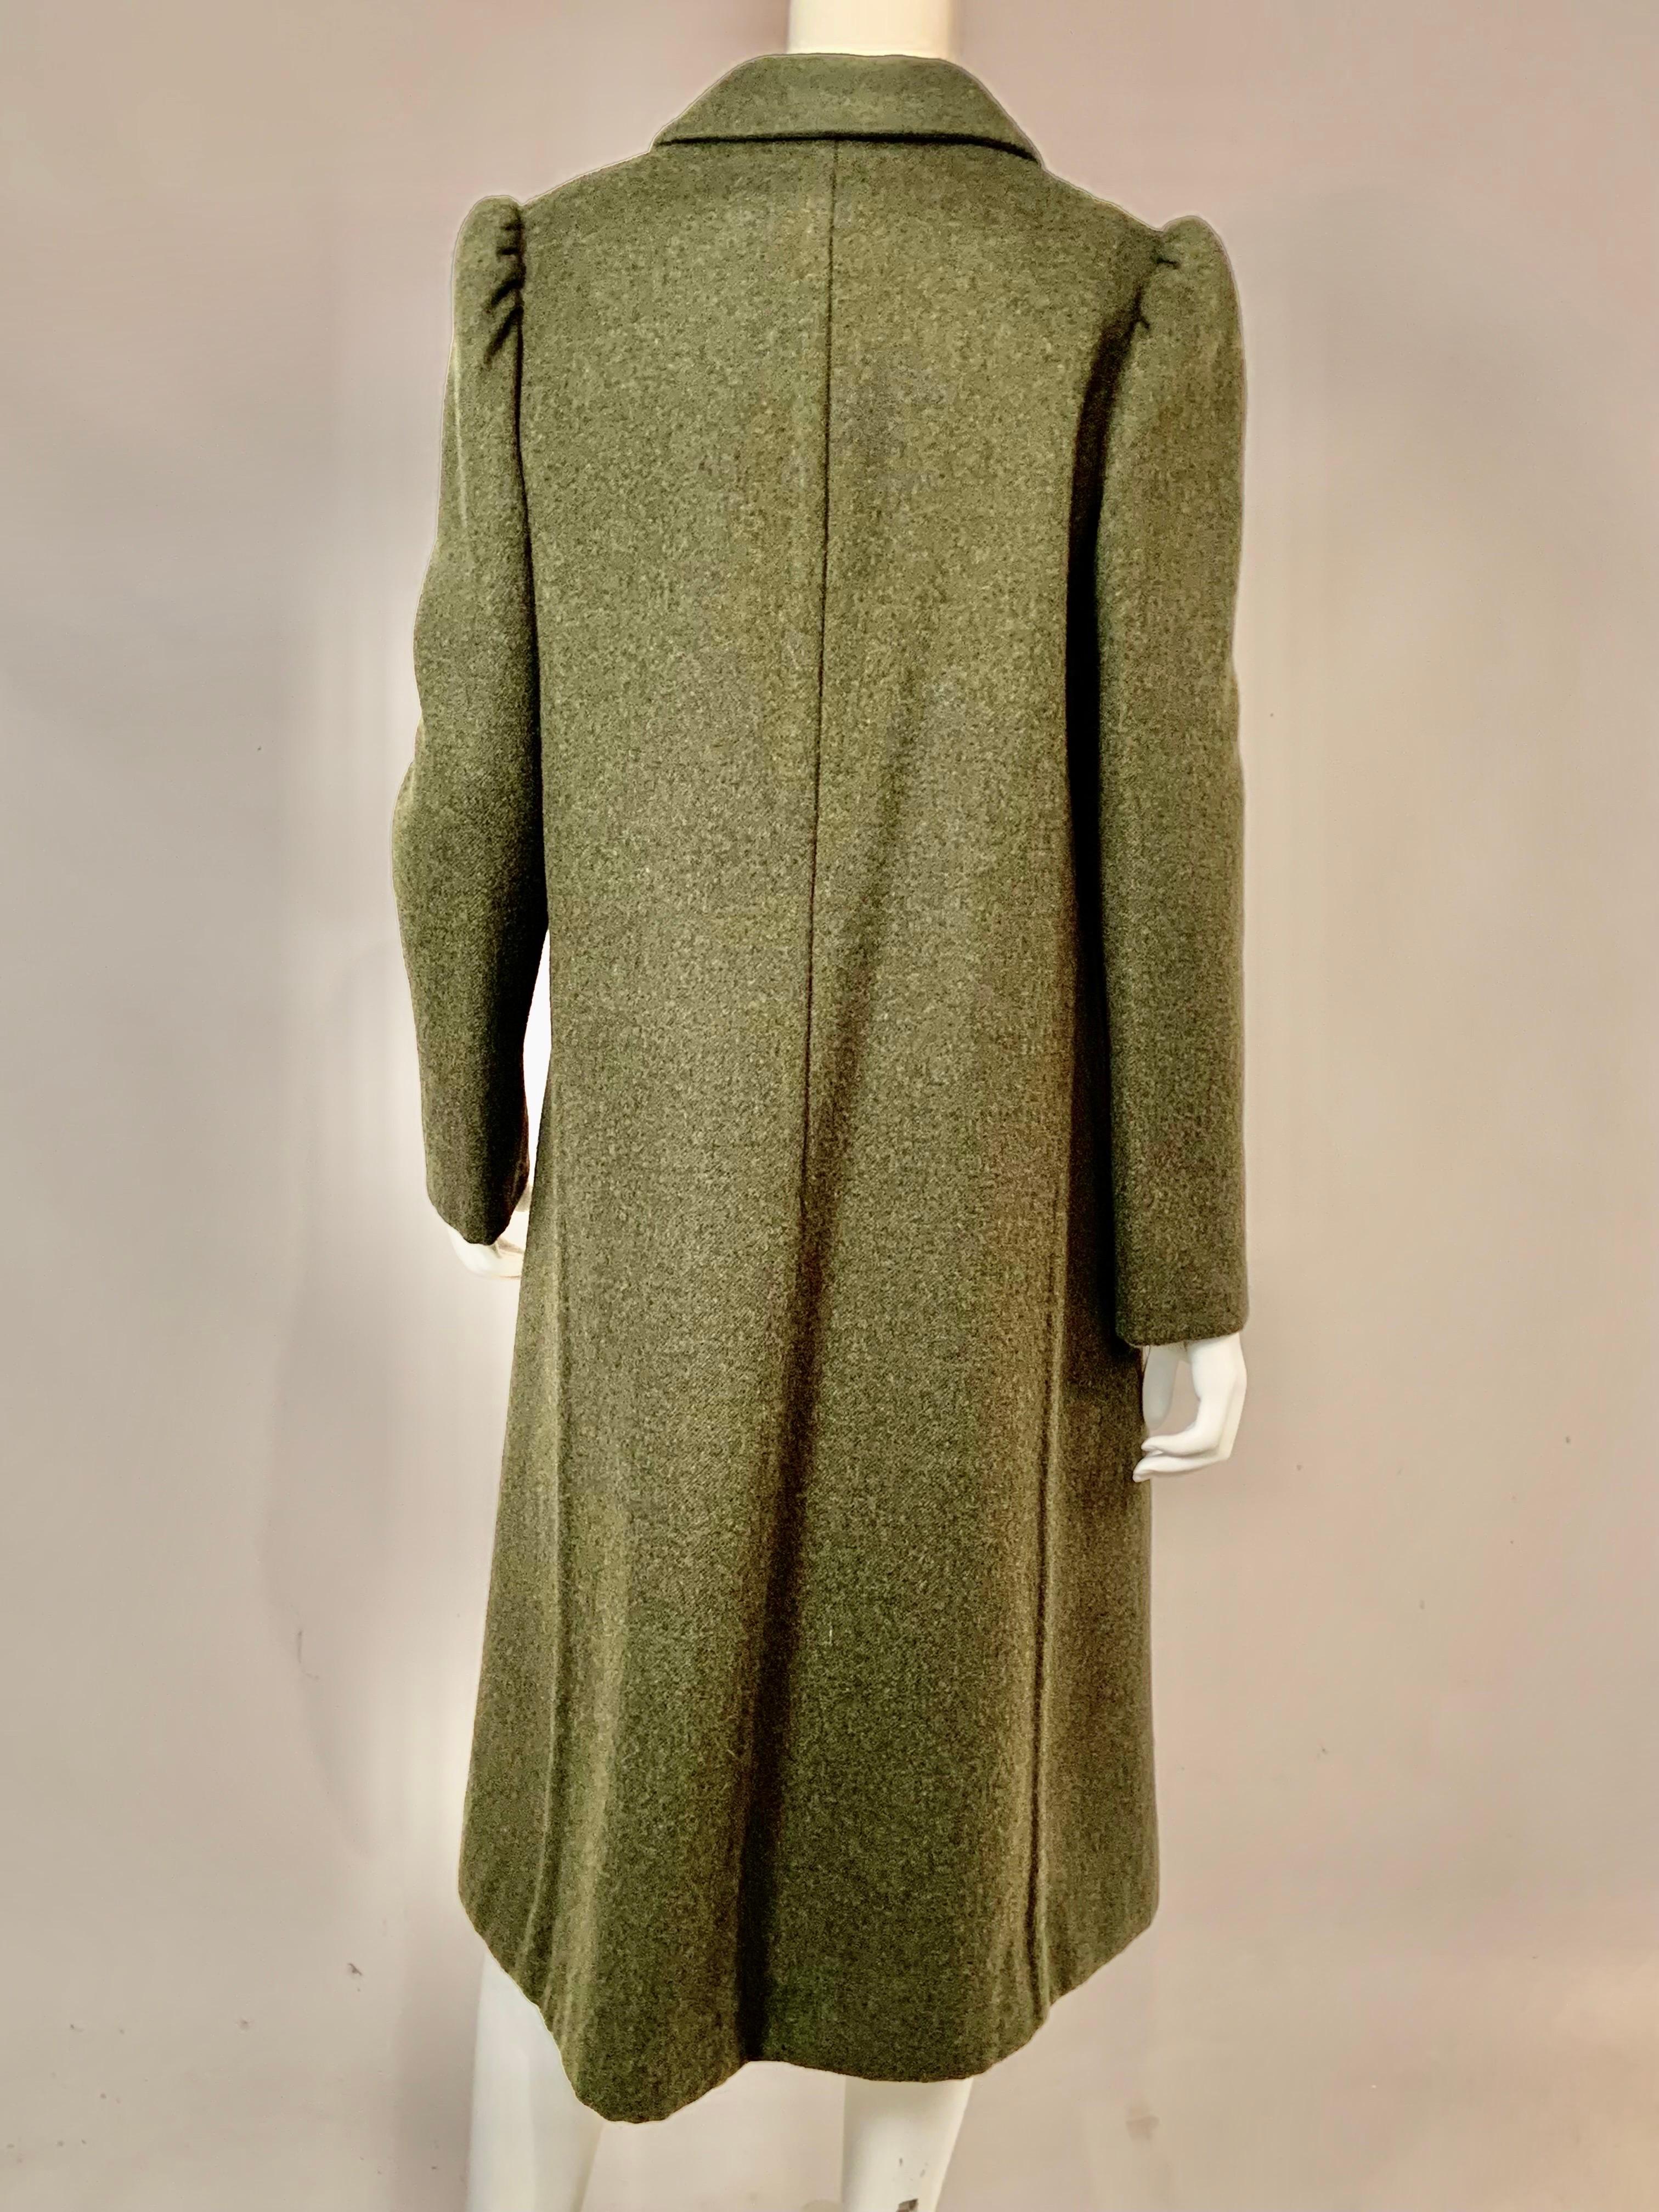 Sybil Connolly Irish Couture Double Faced Loden Green and Plaid Wool Coat For Sale 1